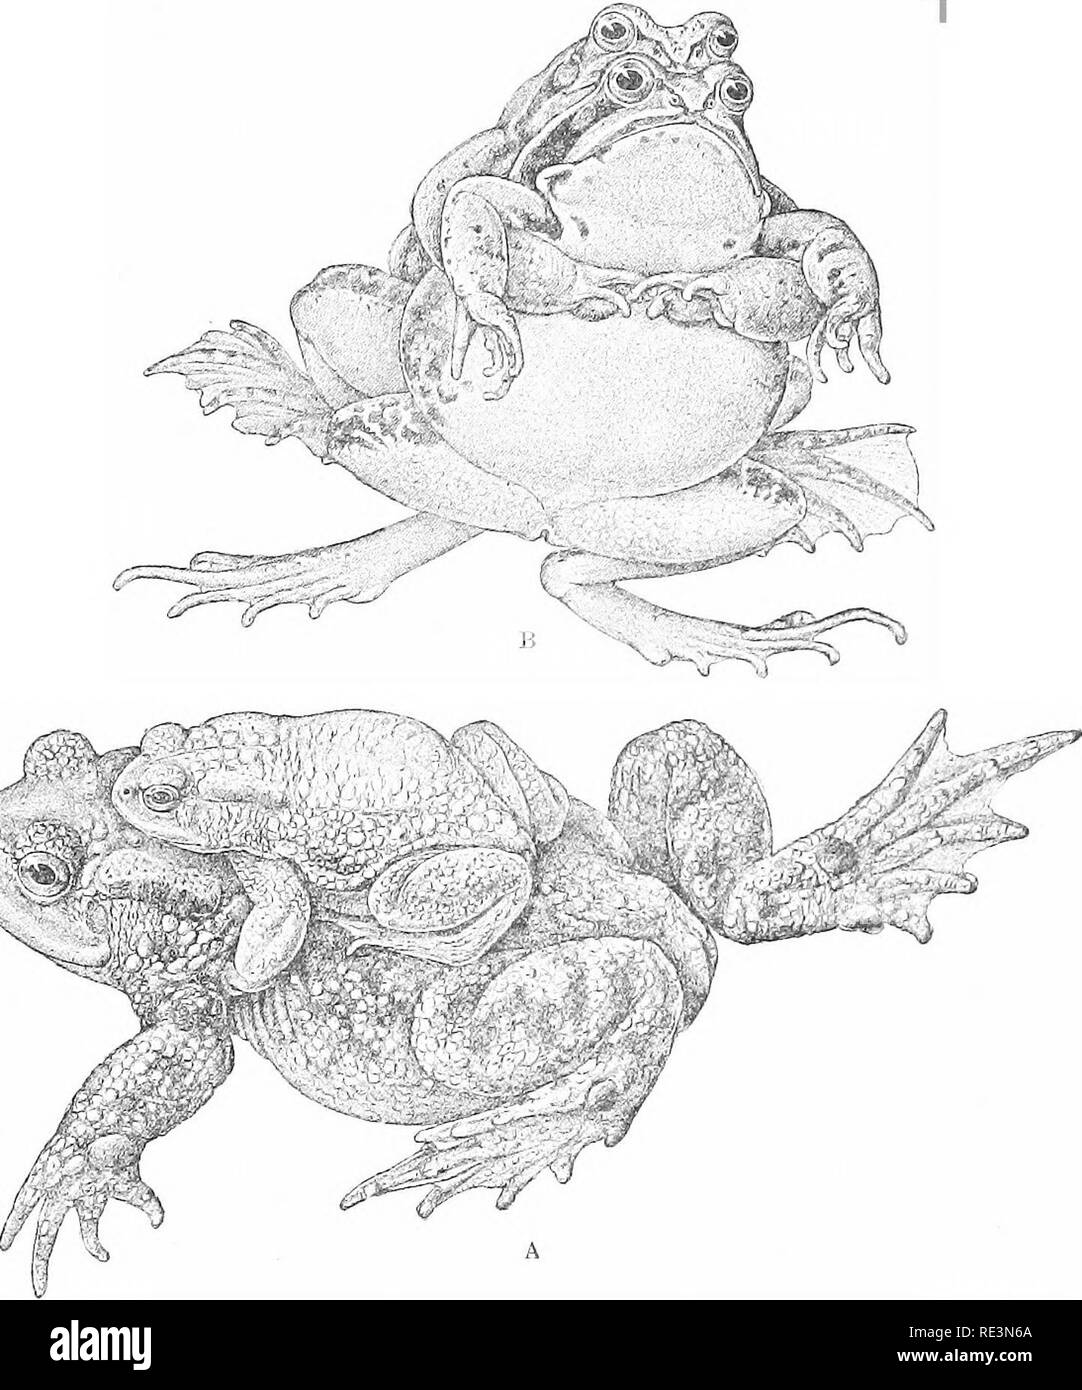 . The tailless batrachians of Europe. Frogs; Amphibians. PAIEING AND OVIPOSITION. 69 Impregnation accompanies or immediately follows, in one or more emissions, the discharge of the eggs. The mode of embrace varies according to the species ; it is axillary in all our genera with horizontal pupil, and lumbar in the others, as shown in the following synopsis : Fig. 26.. Pairs in embrace.^ A. Bufo vulgaris, b. Bana arvalis. I. Male holding the female round the waist. A. The hands joining on the pubic region (Fig. .25, a). Discoglossus, Bombinator, Alytes, Pelobates.. Please note that these images  Stock Photo